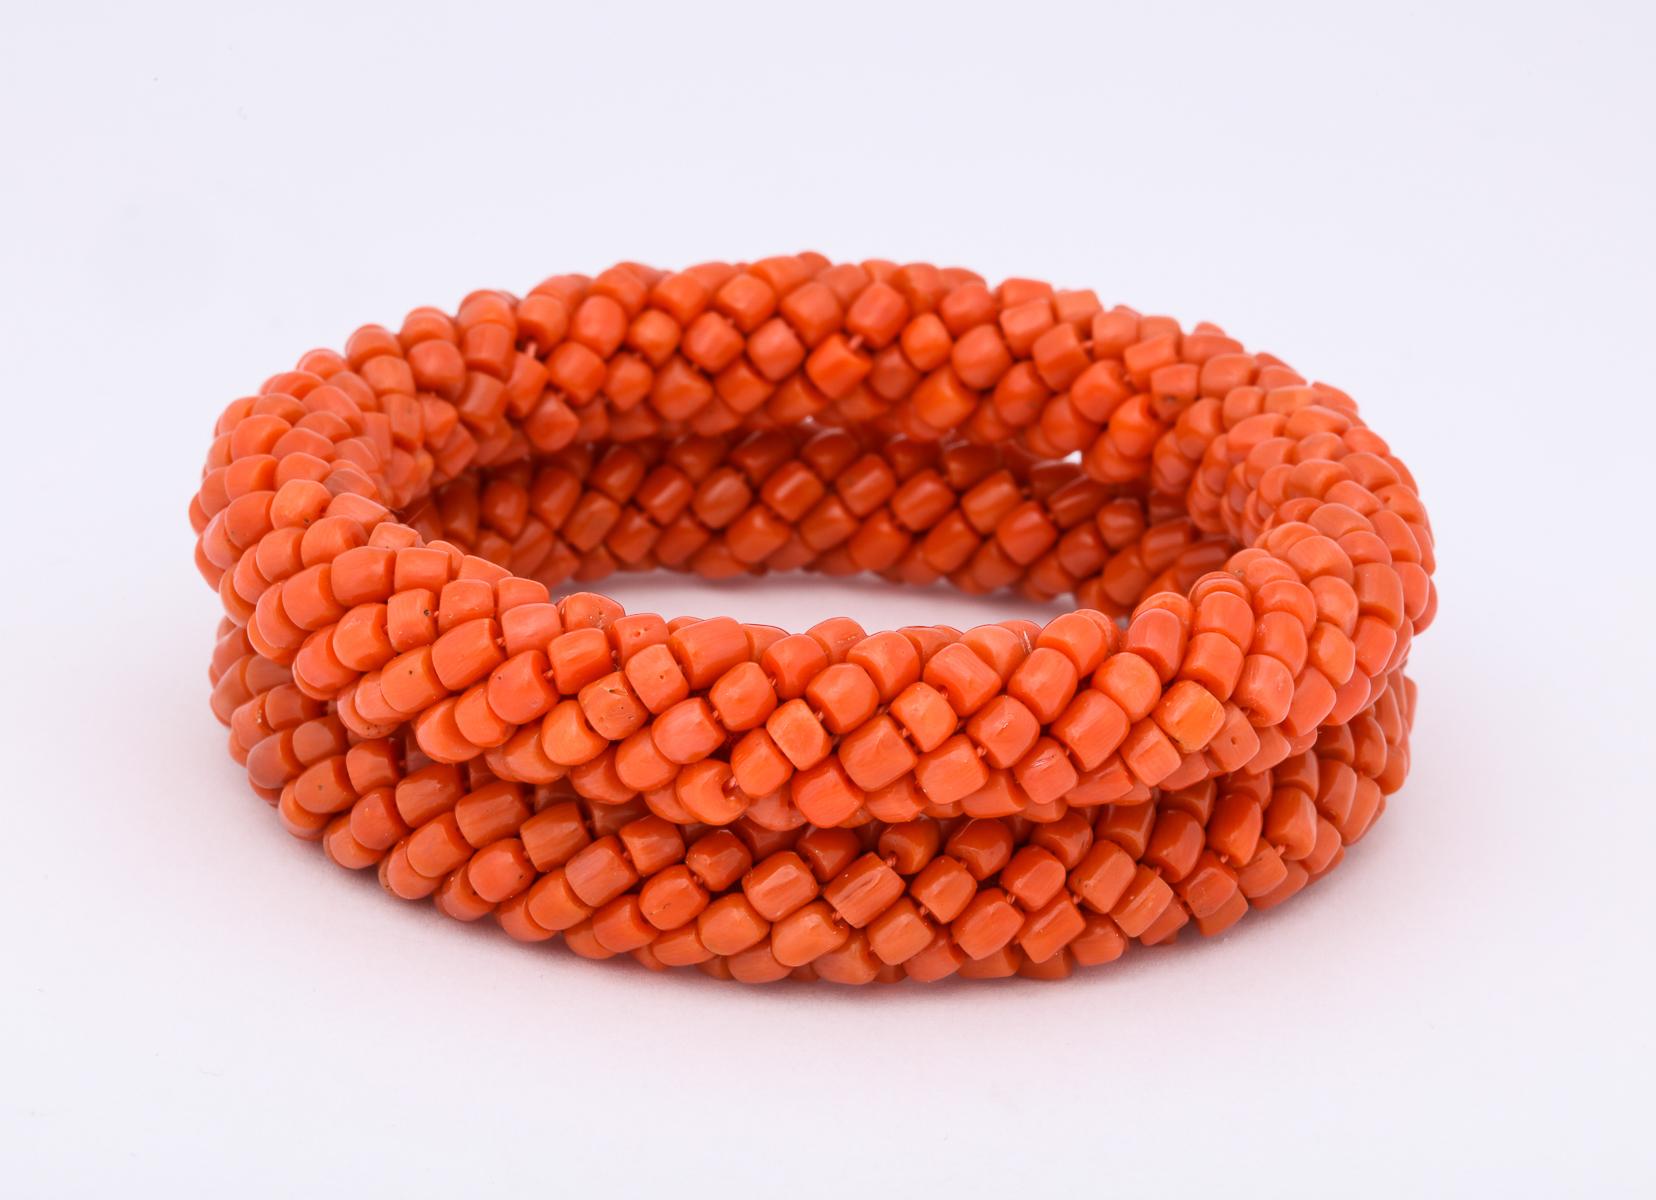 One Pair Of Ladies Criss Cross Basket Weave Design Coral Bead Hard Bangles . One Bangle Measuring 1/2 Inch Approx. Width Other Bangle Measuring A Little Smaller Than 1/2 Inch. Designed In The 1980's In The United States Of America.NOTE: Fits A Over